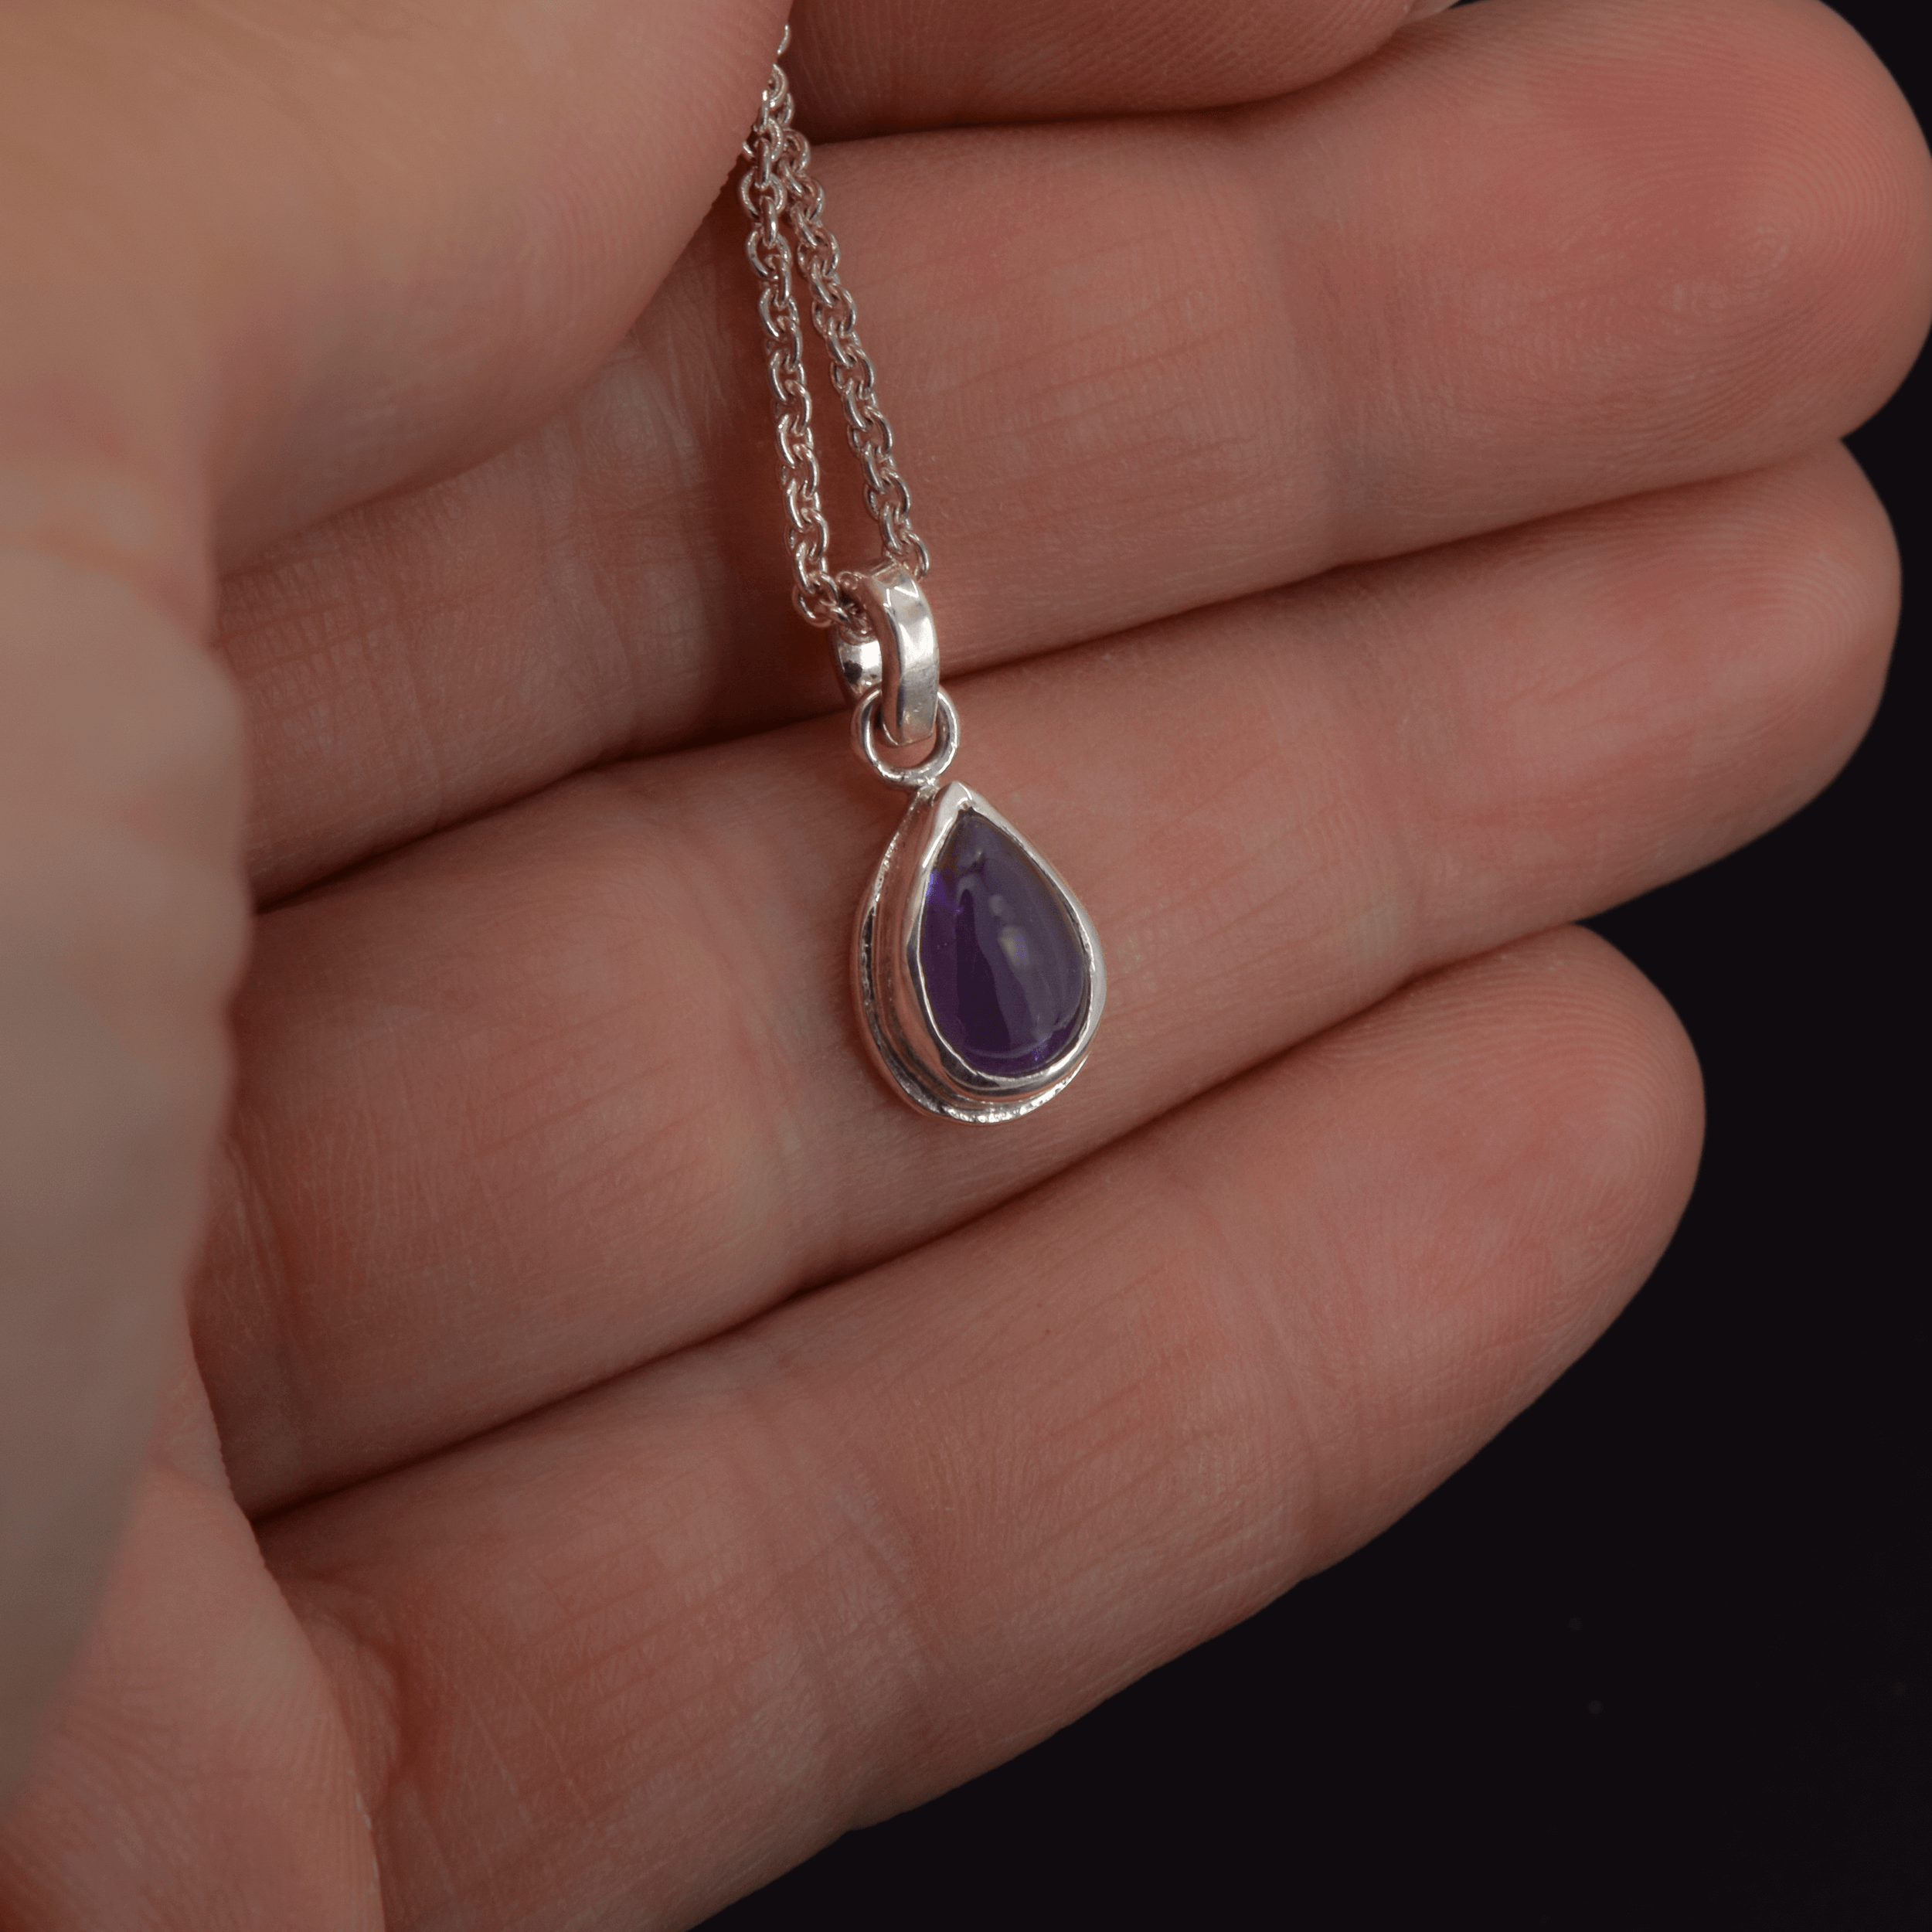 Teardrop shaped iolite pendant necklace in sterling silver hanging on a cable chain shown in hand for scale